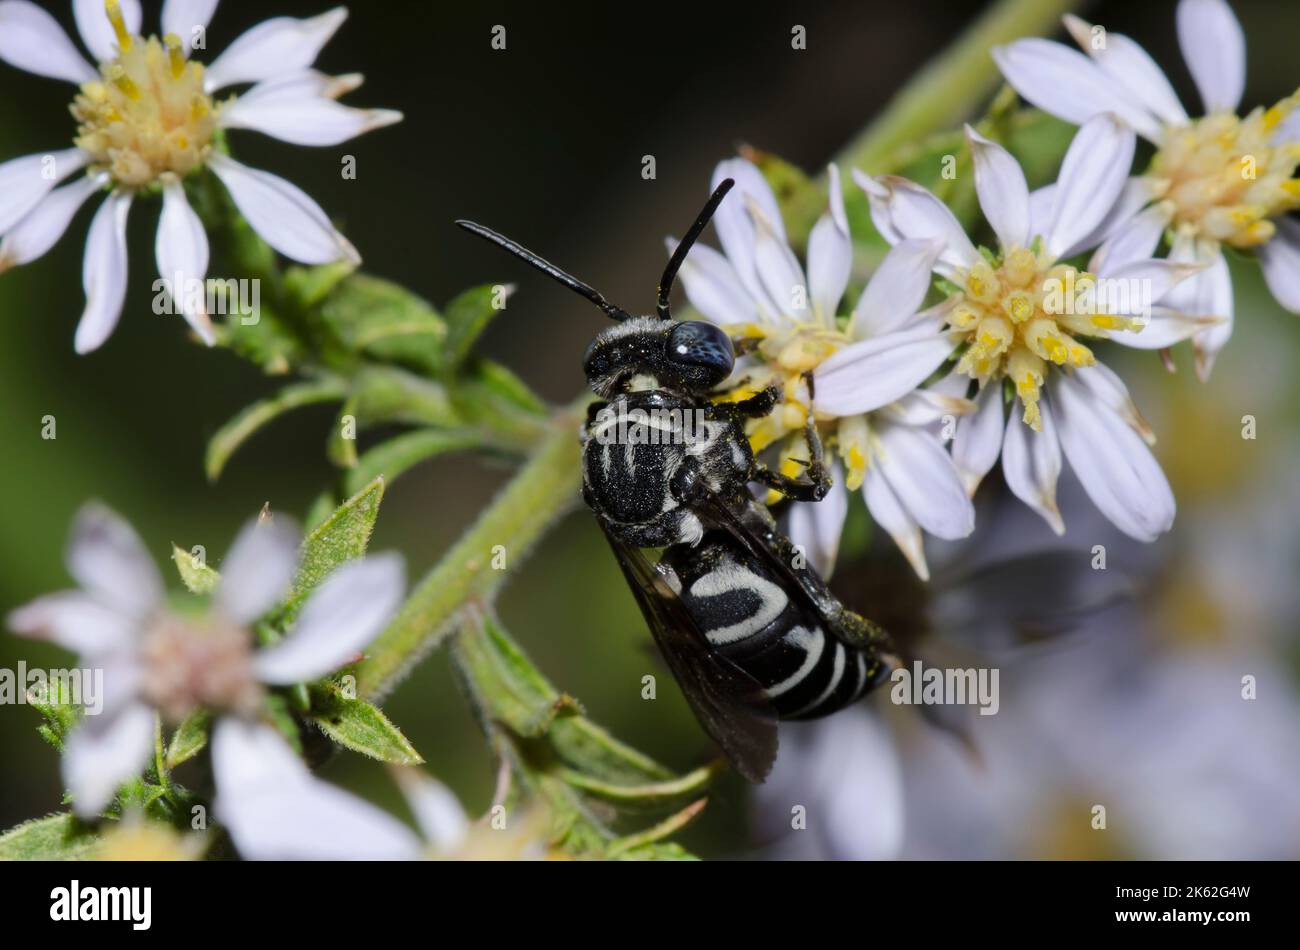 Cuckoo Bee, Tribe Epeolini, foraging on Drummond's Aster, Symphyotrichum drummondii Stock Photo